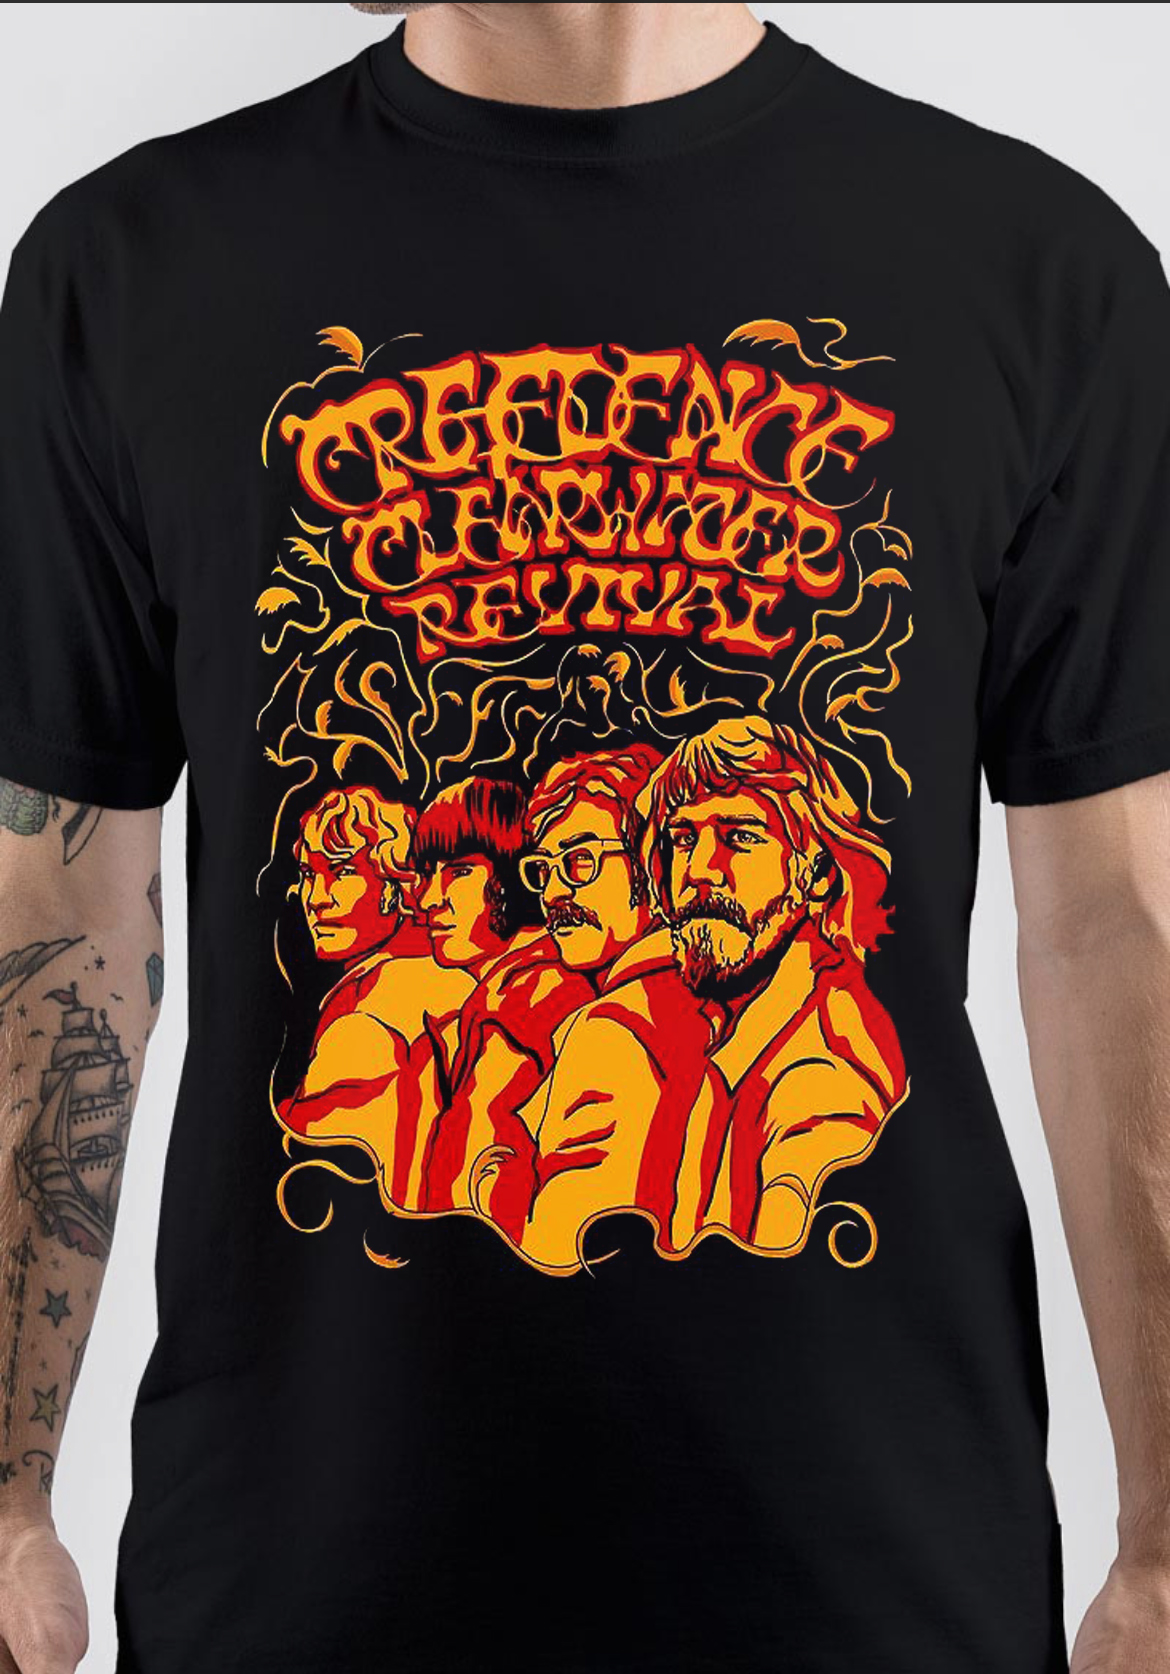 Creedence Clearwater Revival T-Shirt | Swag Shirts